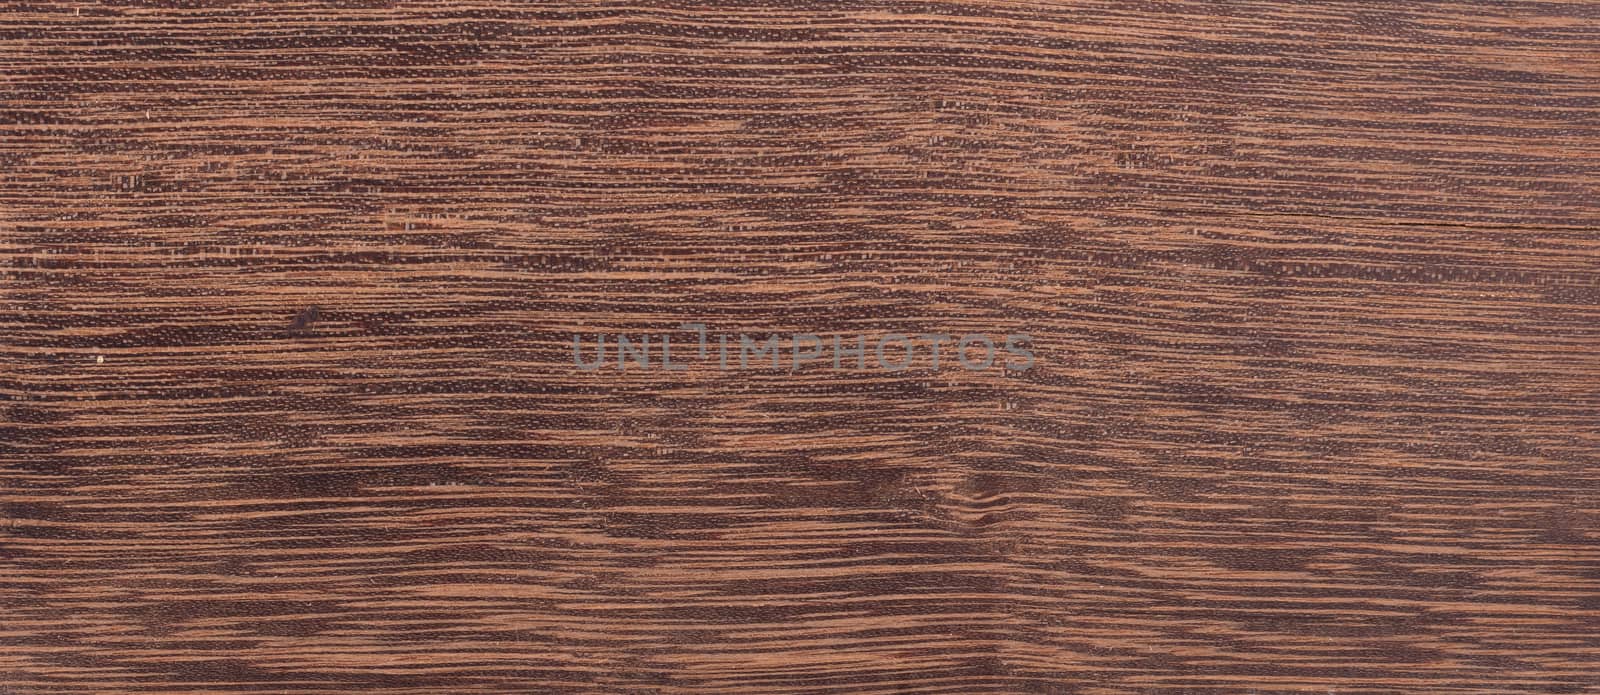 Wood background - Wood from the tropical rainforest - Suriname - Vouacapoua americana